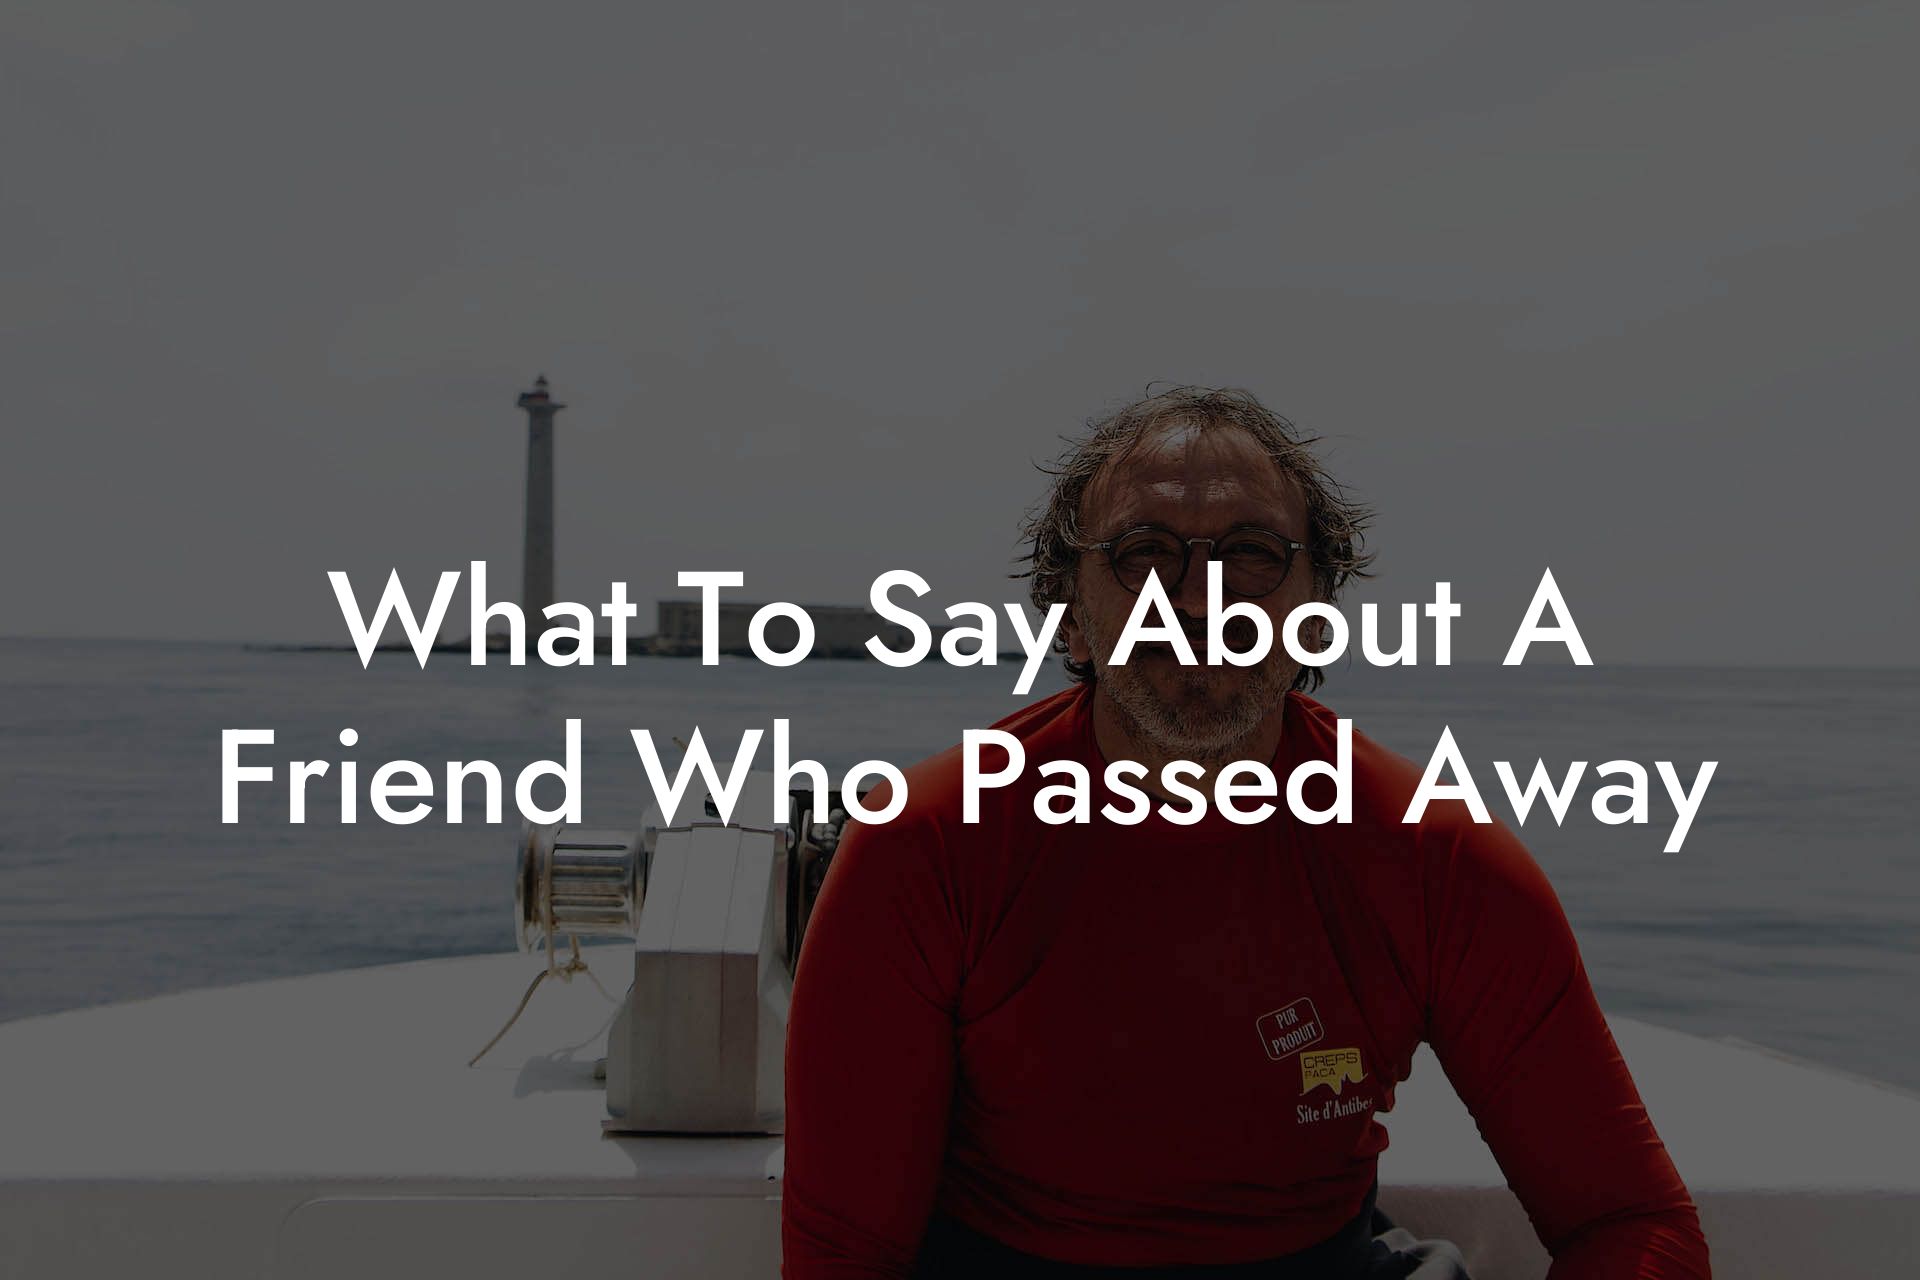 What To Say About A Friend Who Passed Away